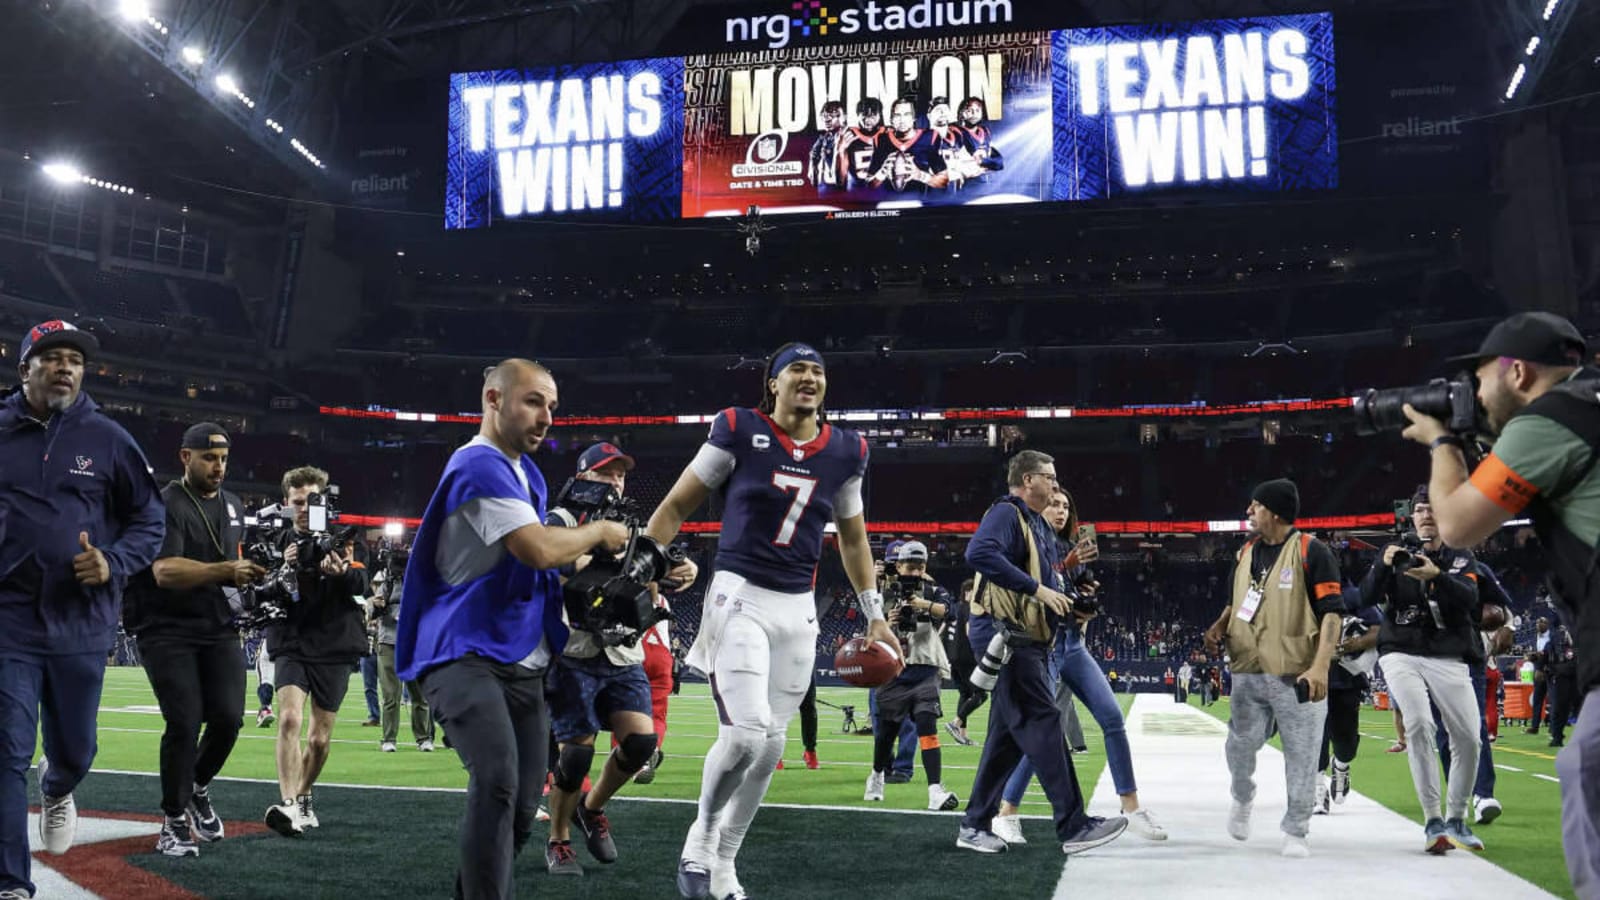 Watch: Cushing Narrates Texans Game Trailer for Divisional Round vs. Ravens